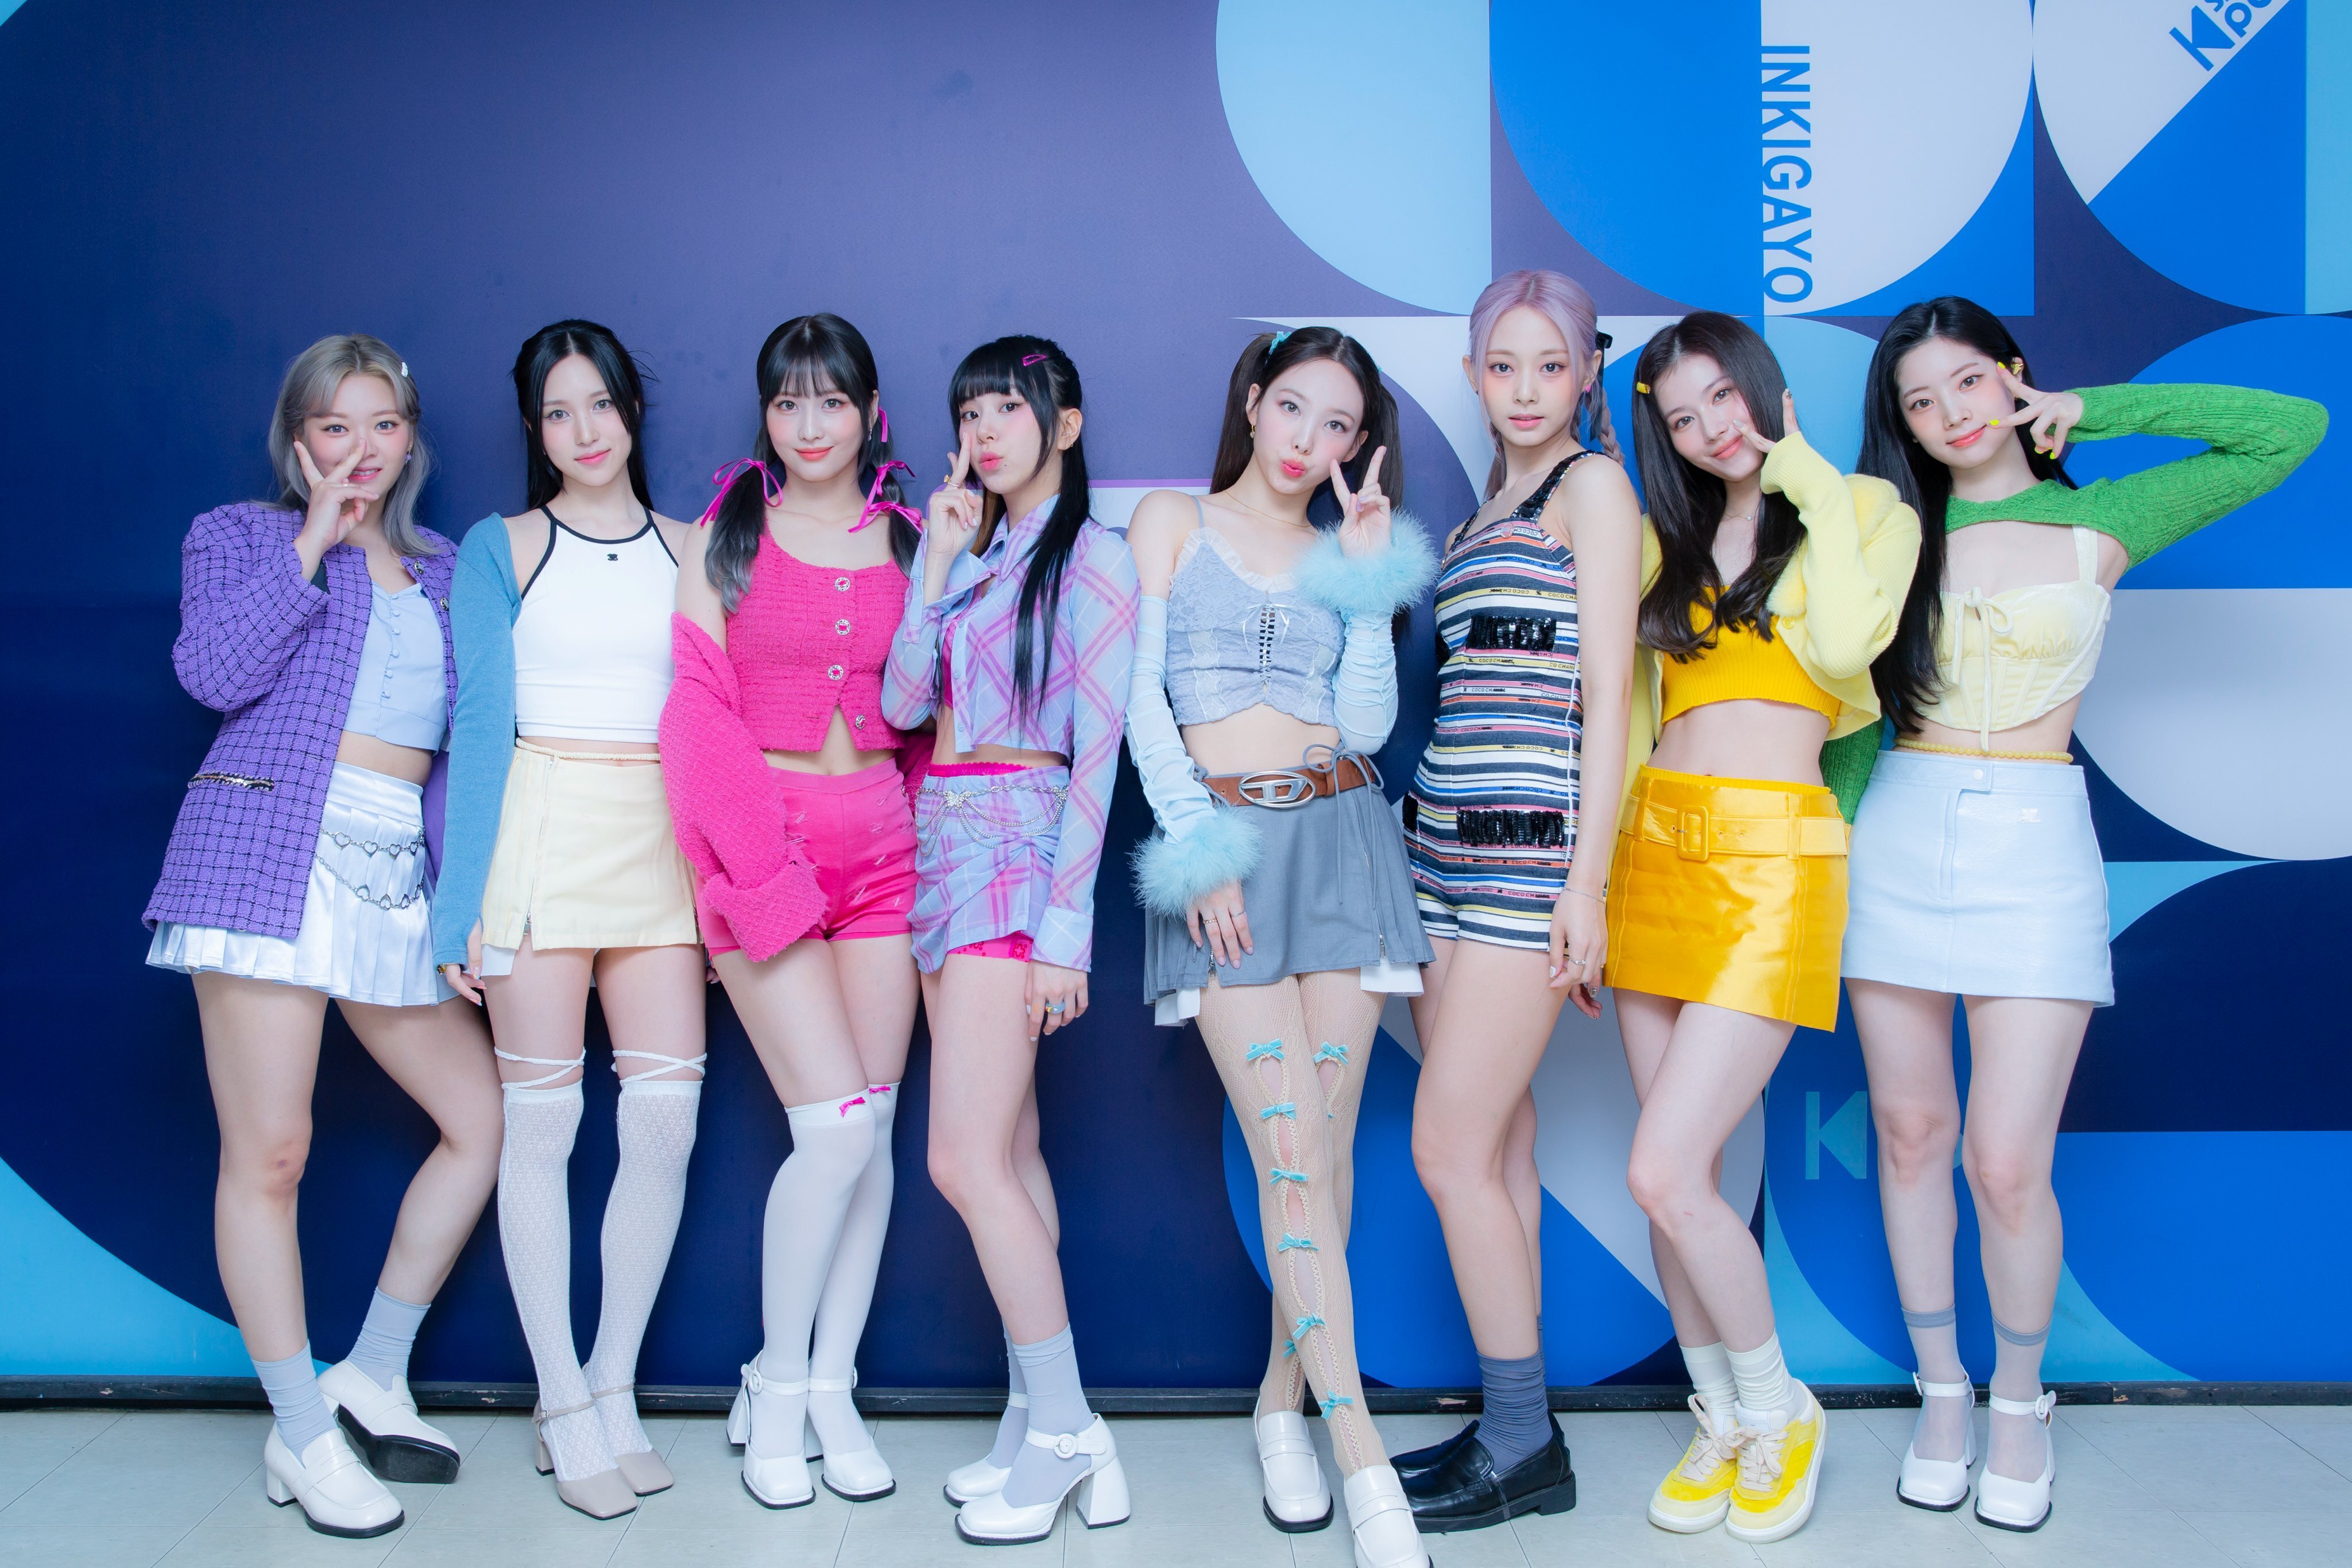 220828 SBS Twitter Update - TWICE at Inkigayo Photowall | kpopping